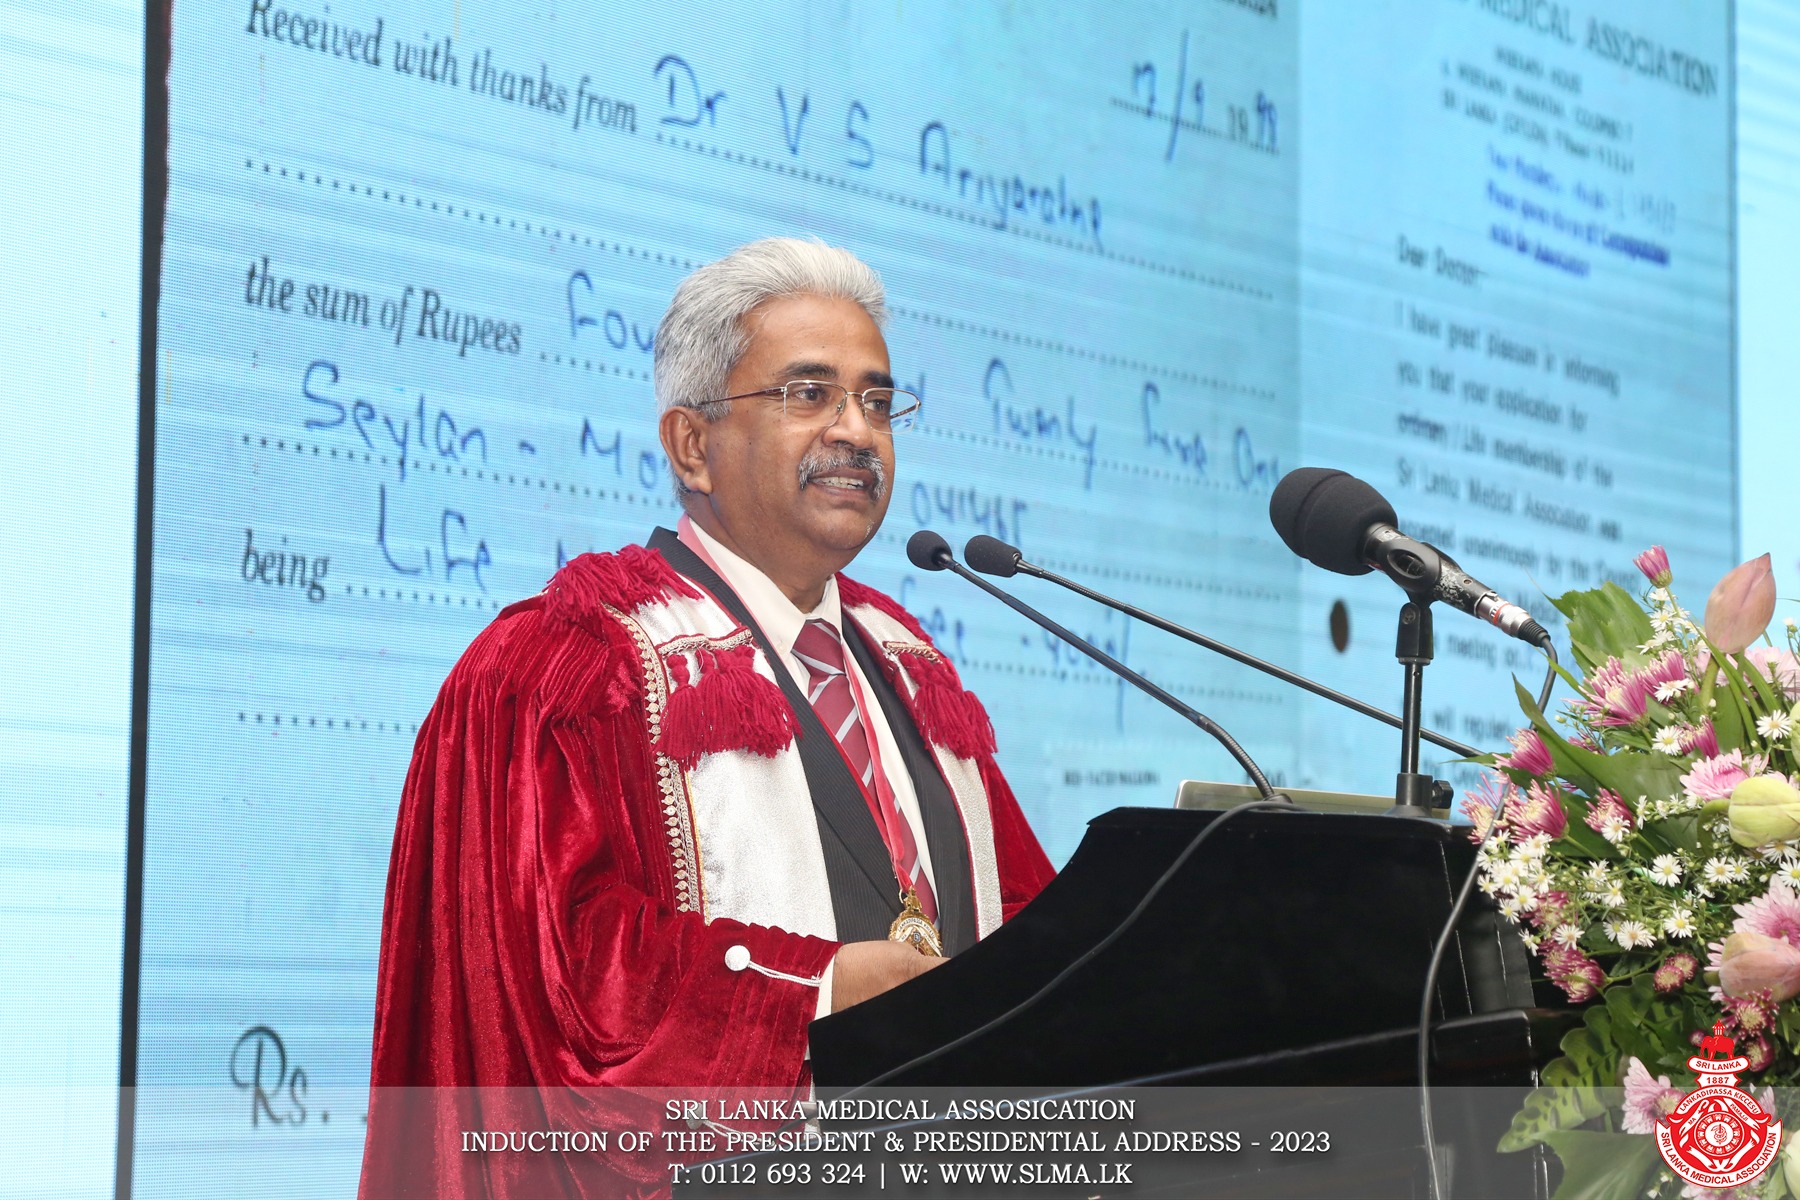 Dr Vinya Ariyaratne, Chair of SIHL was recently inducted as the President of the Sri Lanka Medical Association: SLMA